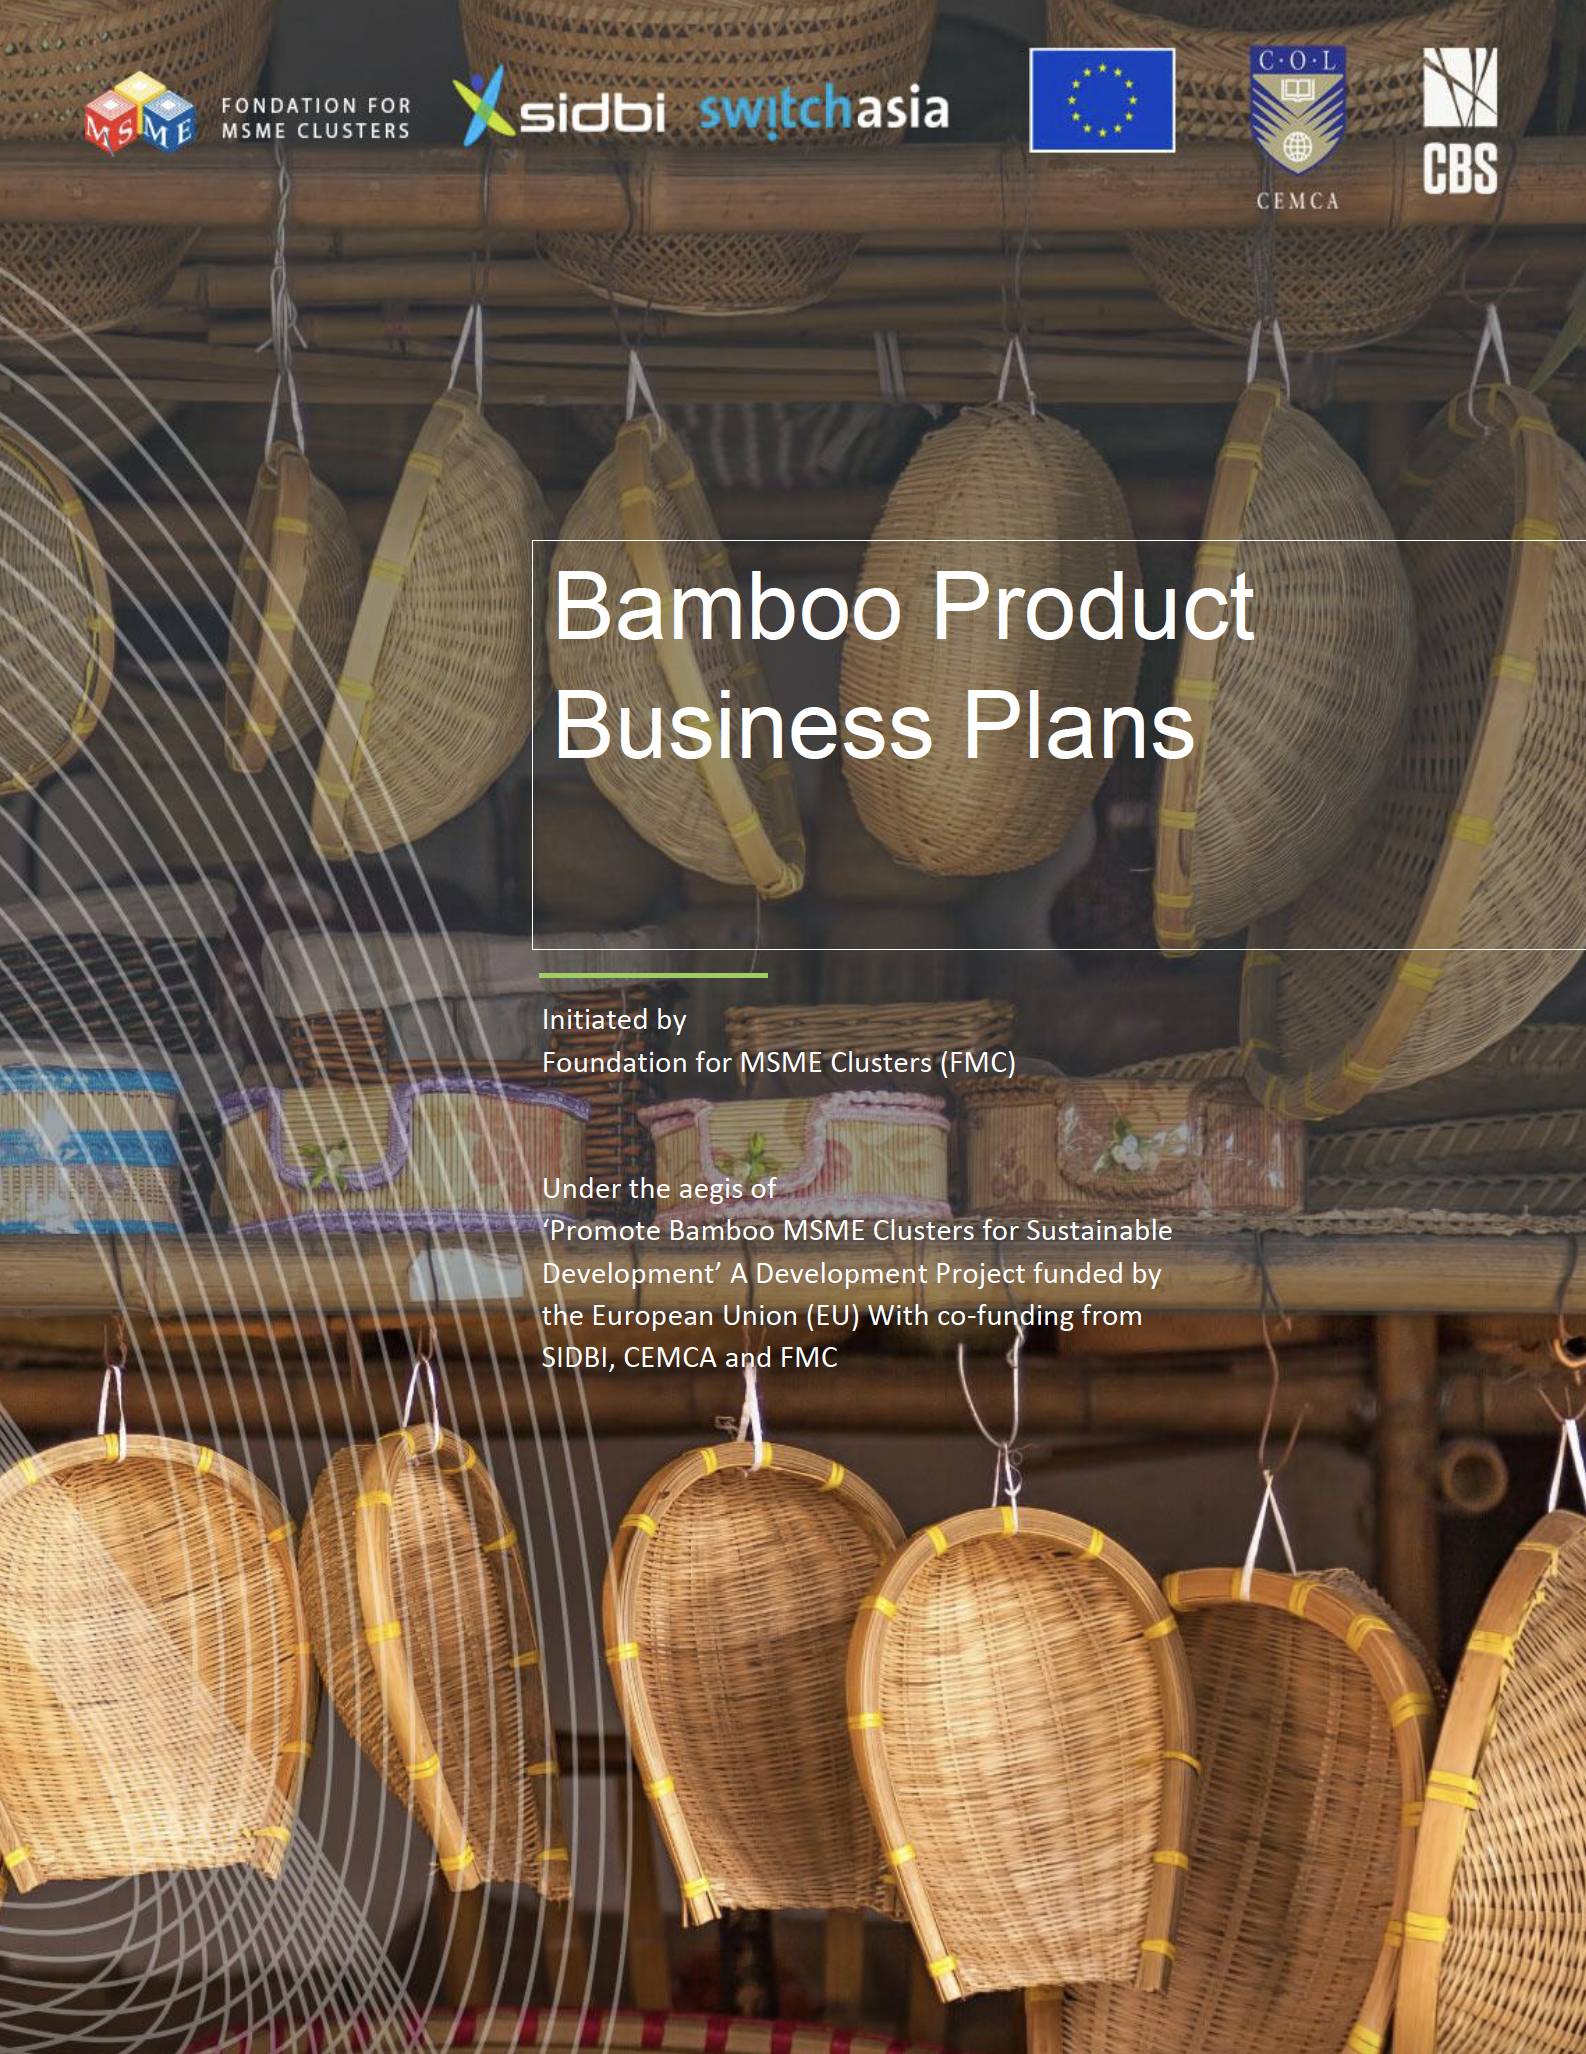 Bamboo products business plans